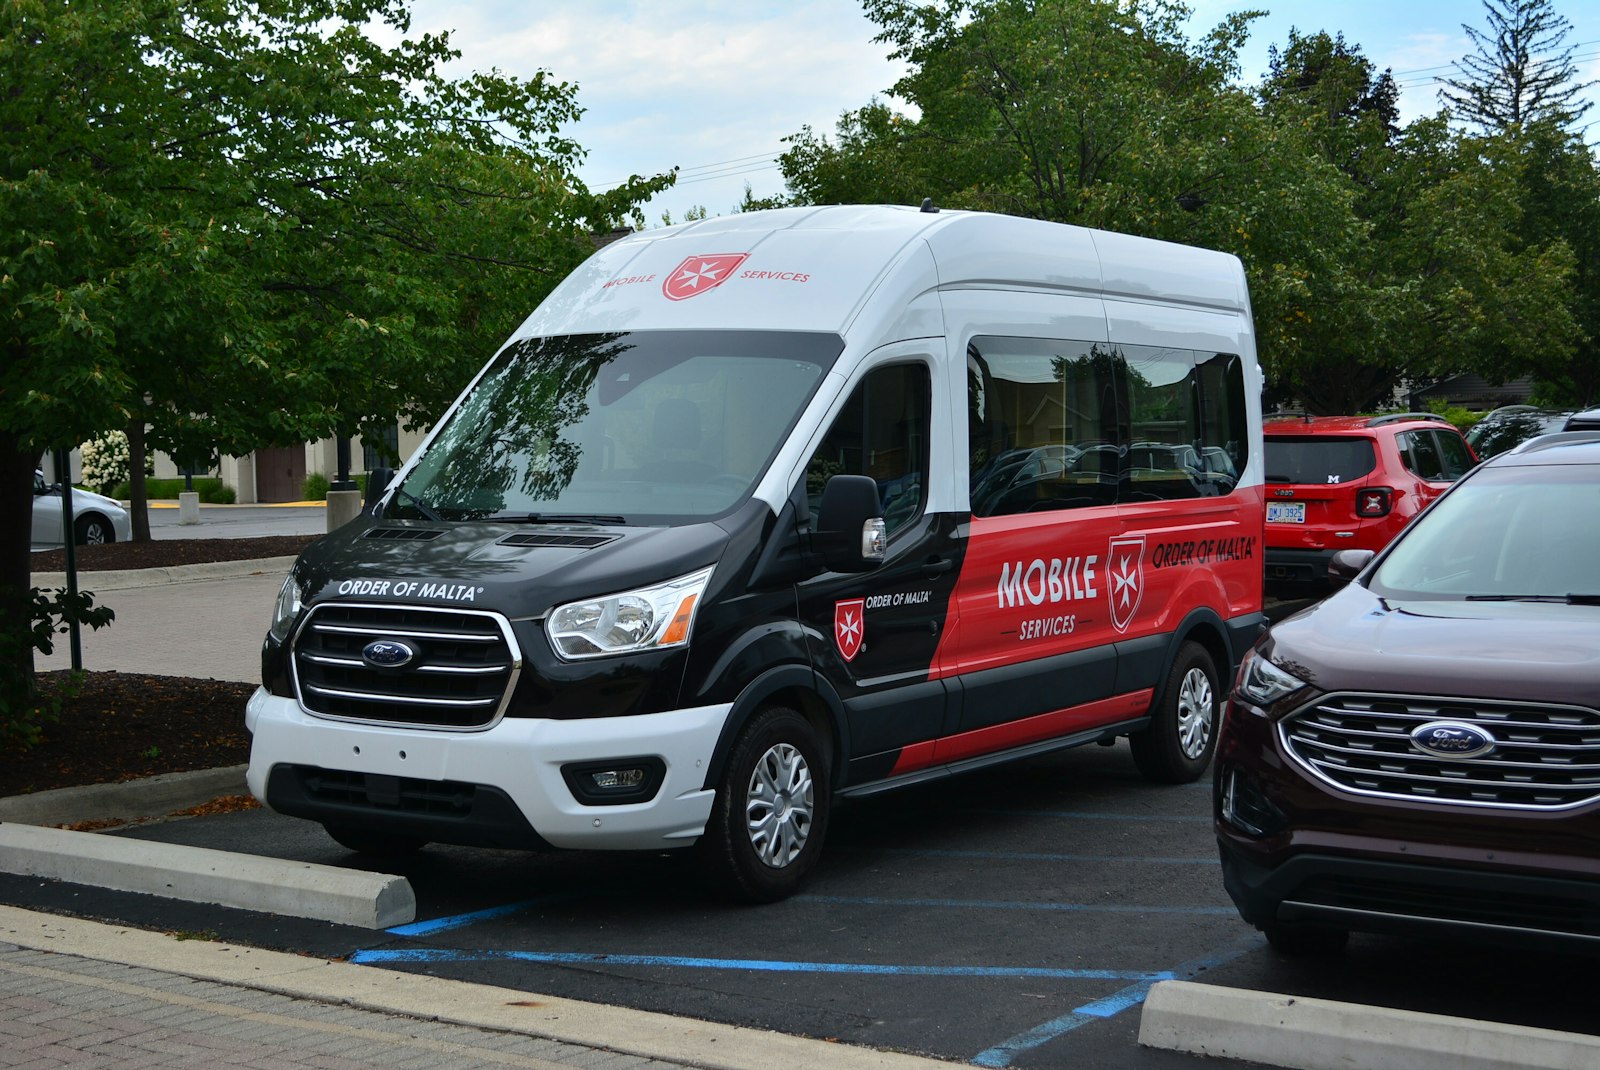 The Order of Malta's new Mobile Ministries van is the the third such vehicle for the Order of Malta's American Association, which adopted the program three years ago in St. Louis. Malta Mobile Ministries is a separate nonprofit that partners with the Order of Malta's three U.S.-based associations, having begun with the order's Western Association in California.